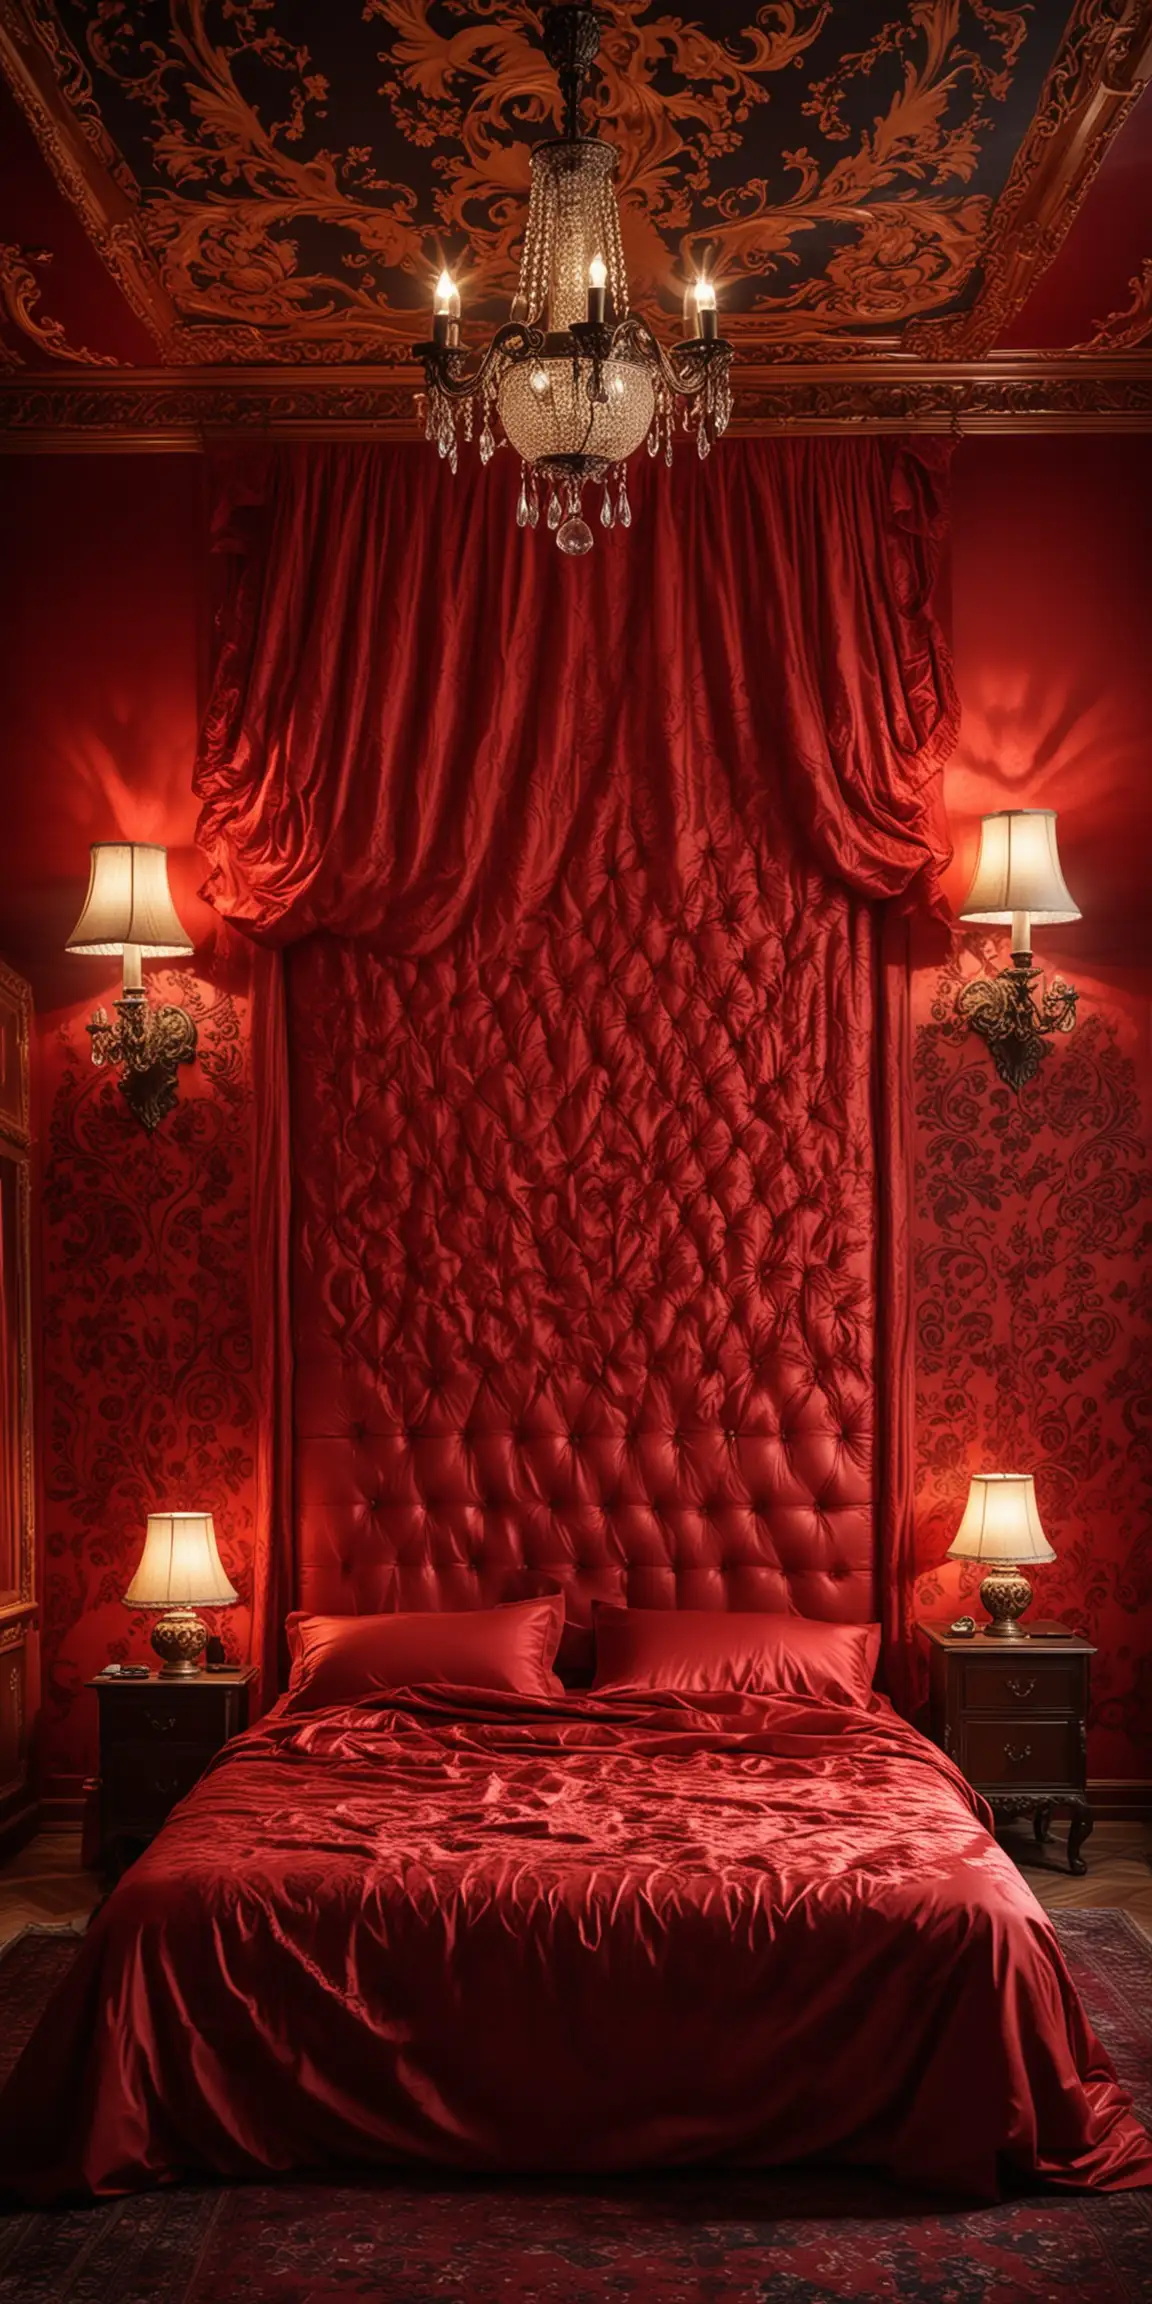 Elegant Bedroom Decor with Red Vinyl Accents and Baroque Lamps